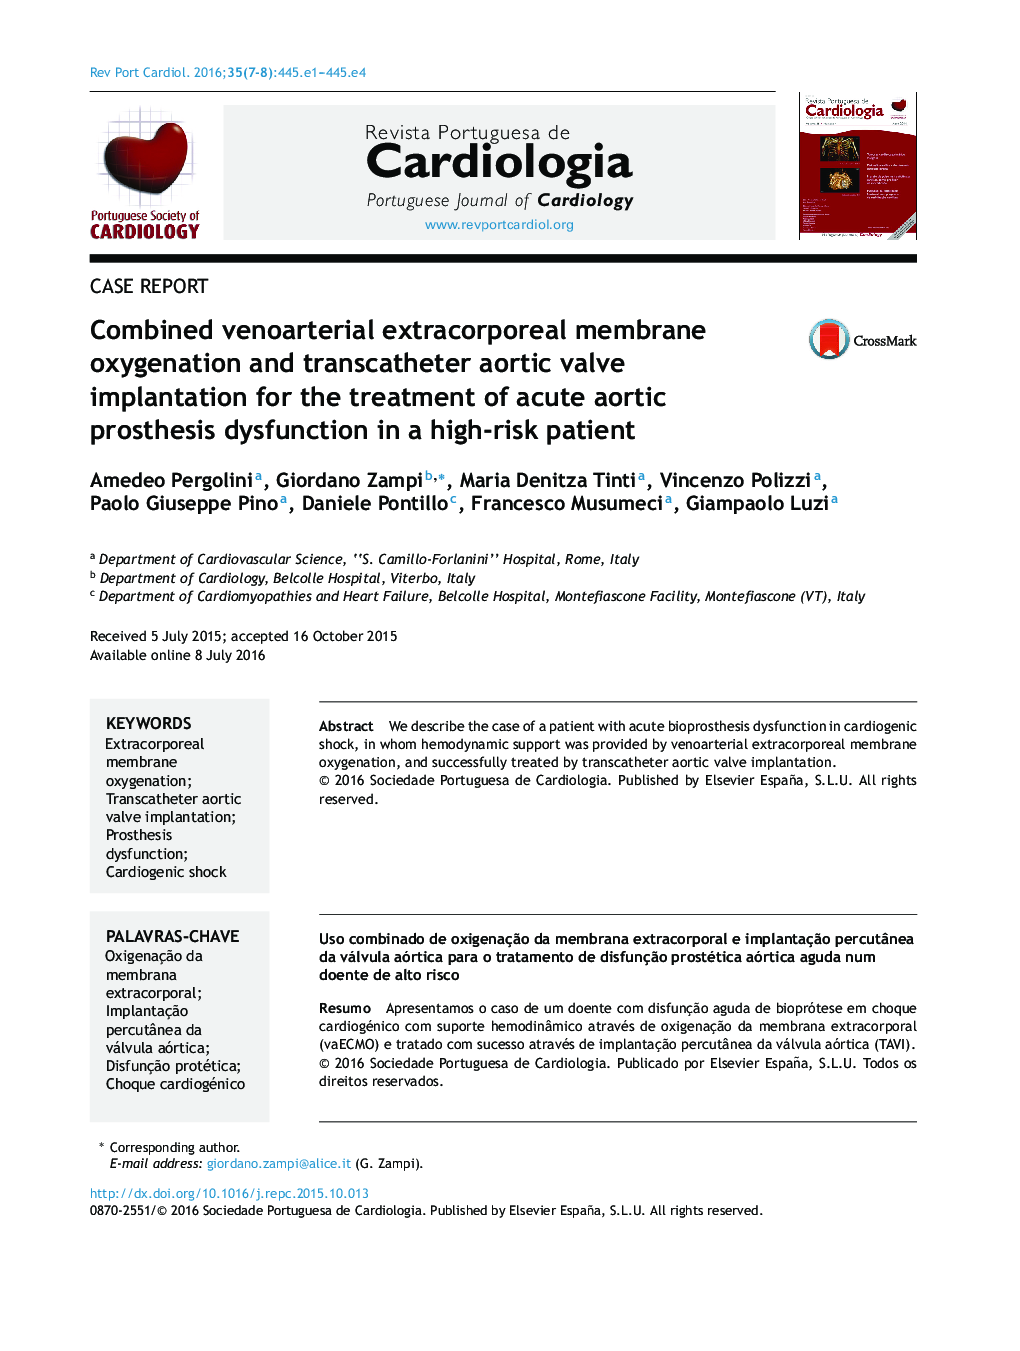 Combined venoarterial extracorporeal membrane oxygenation and transcatheter aortic valve implantation for the treatment of acute aortic prosthesis dysfunction in a high-risk patient